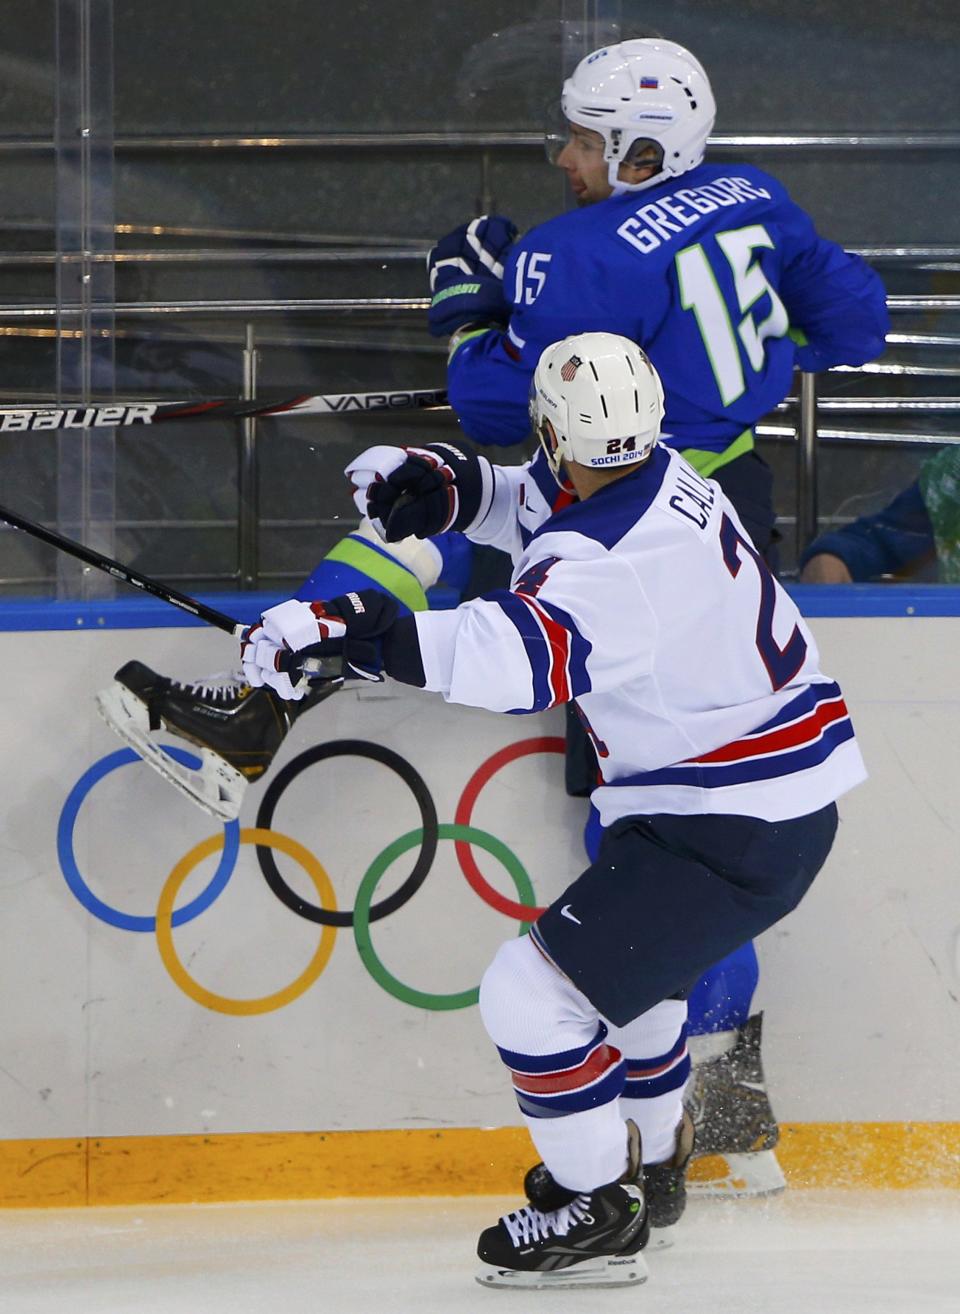 Slovenia's Blaz Gregorc (15) is checked into the boards by Team USA's Ryan Callahan (24) during the first period of their men's preliminary round ice hockey game at the 2014 Sochi Winter Olympics, February 16, 2014. REUTERS/Brian Snyder (RUSSIA - Tags: OLYMPICS SPORT ICE HOCKEY)